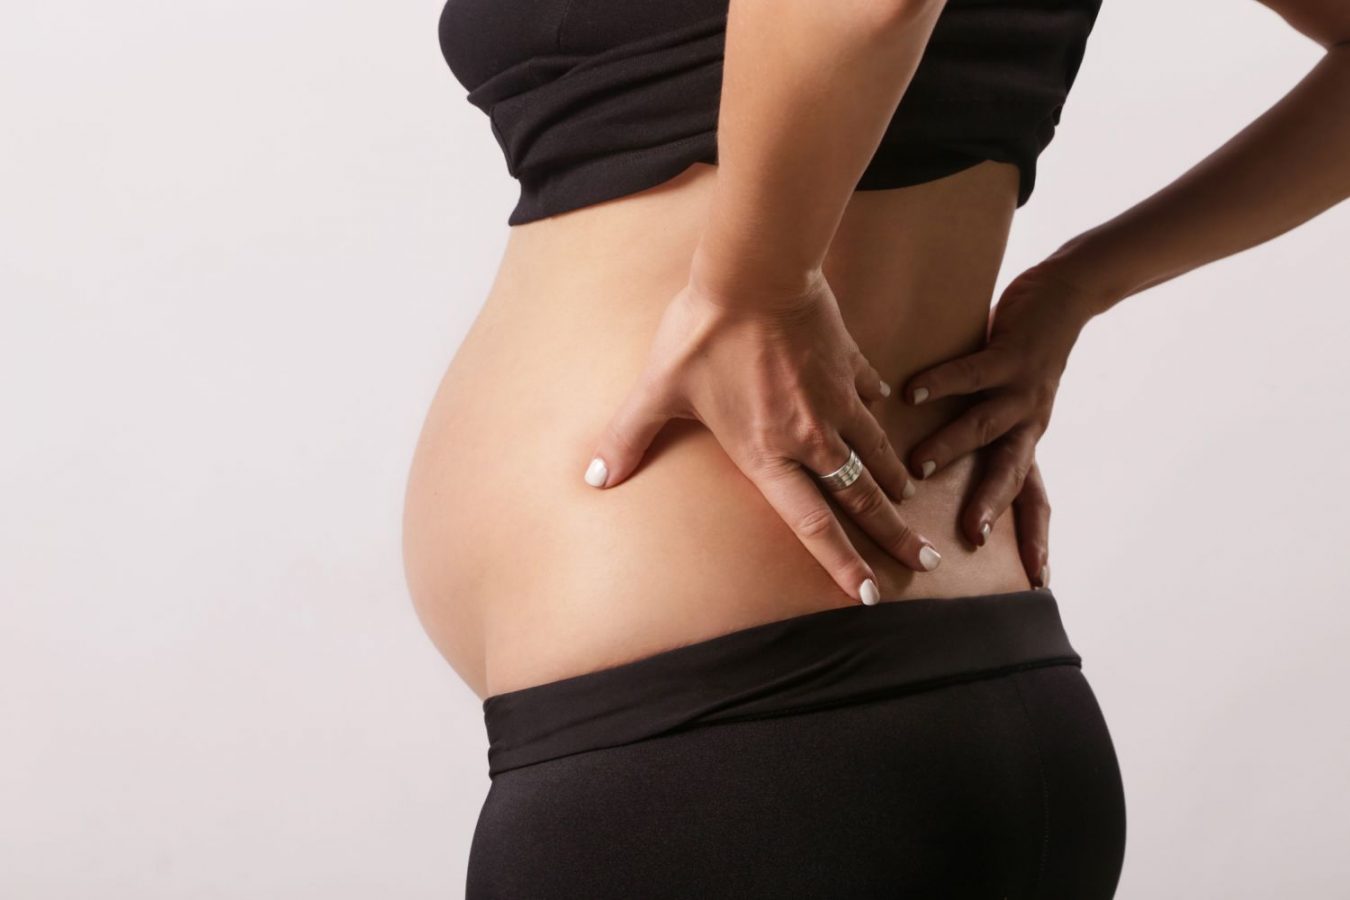 Things you wonder about exercise during pregnancy #1